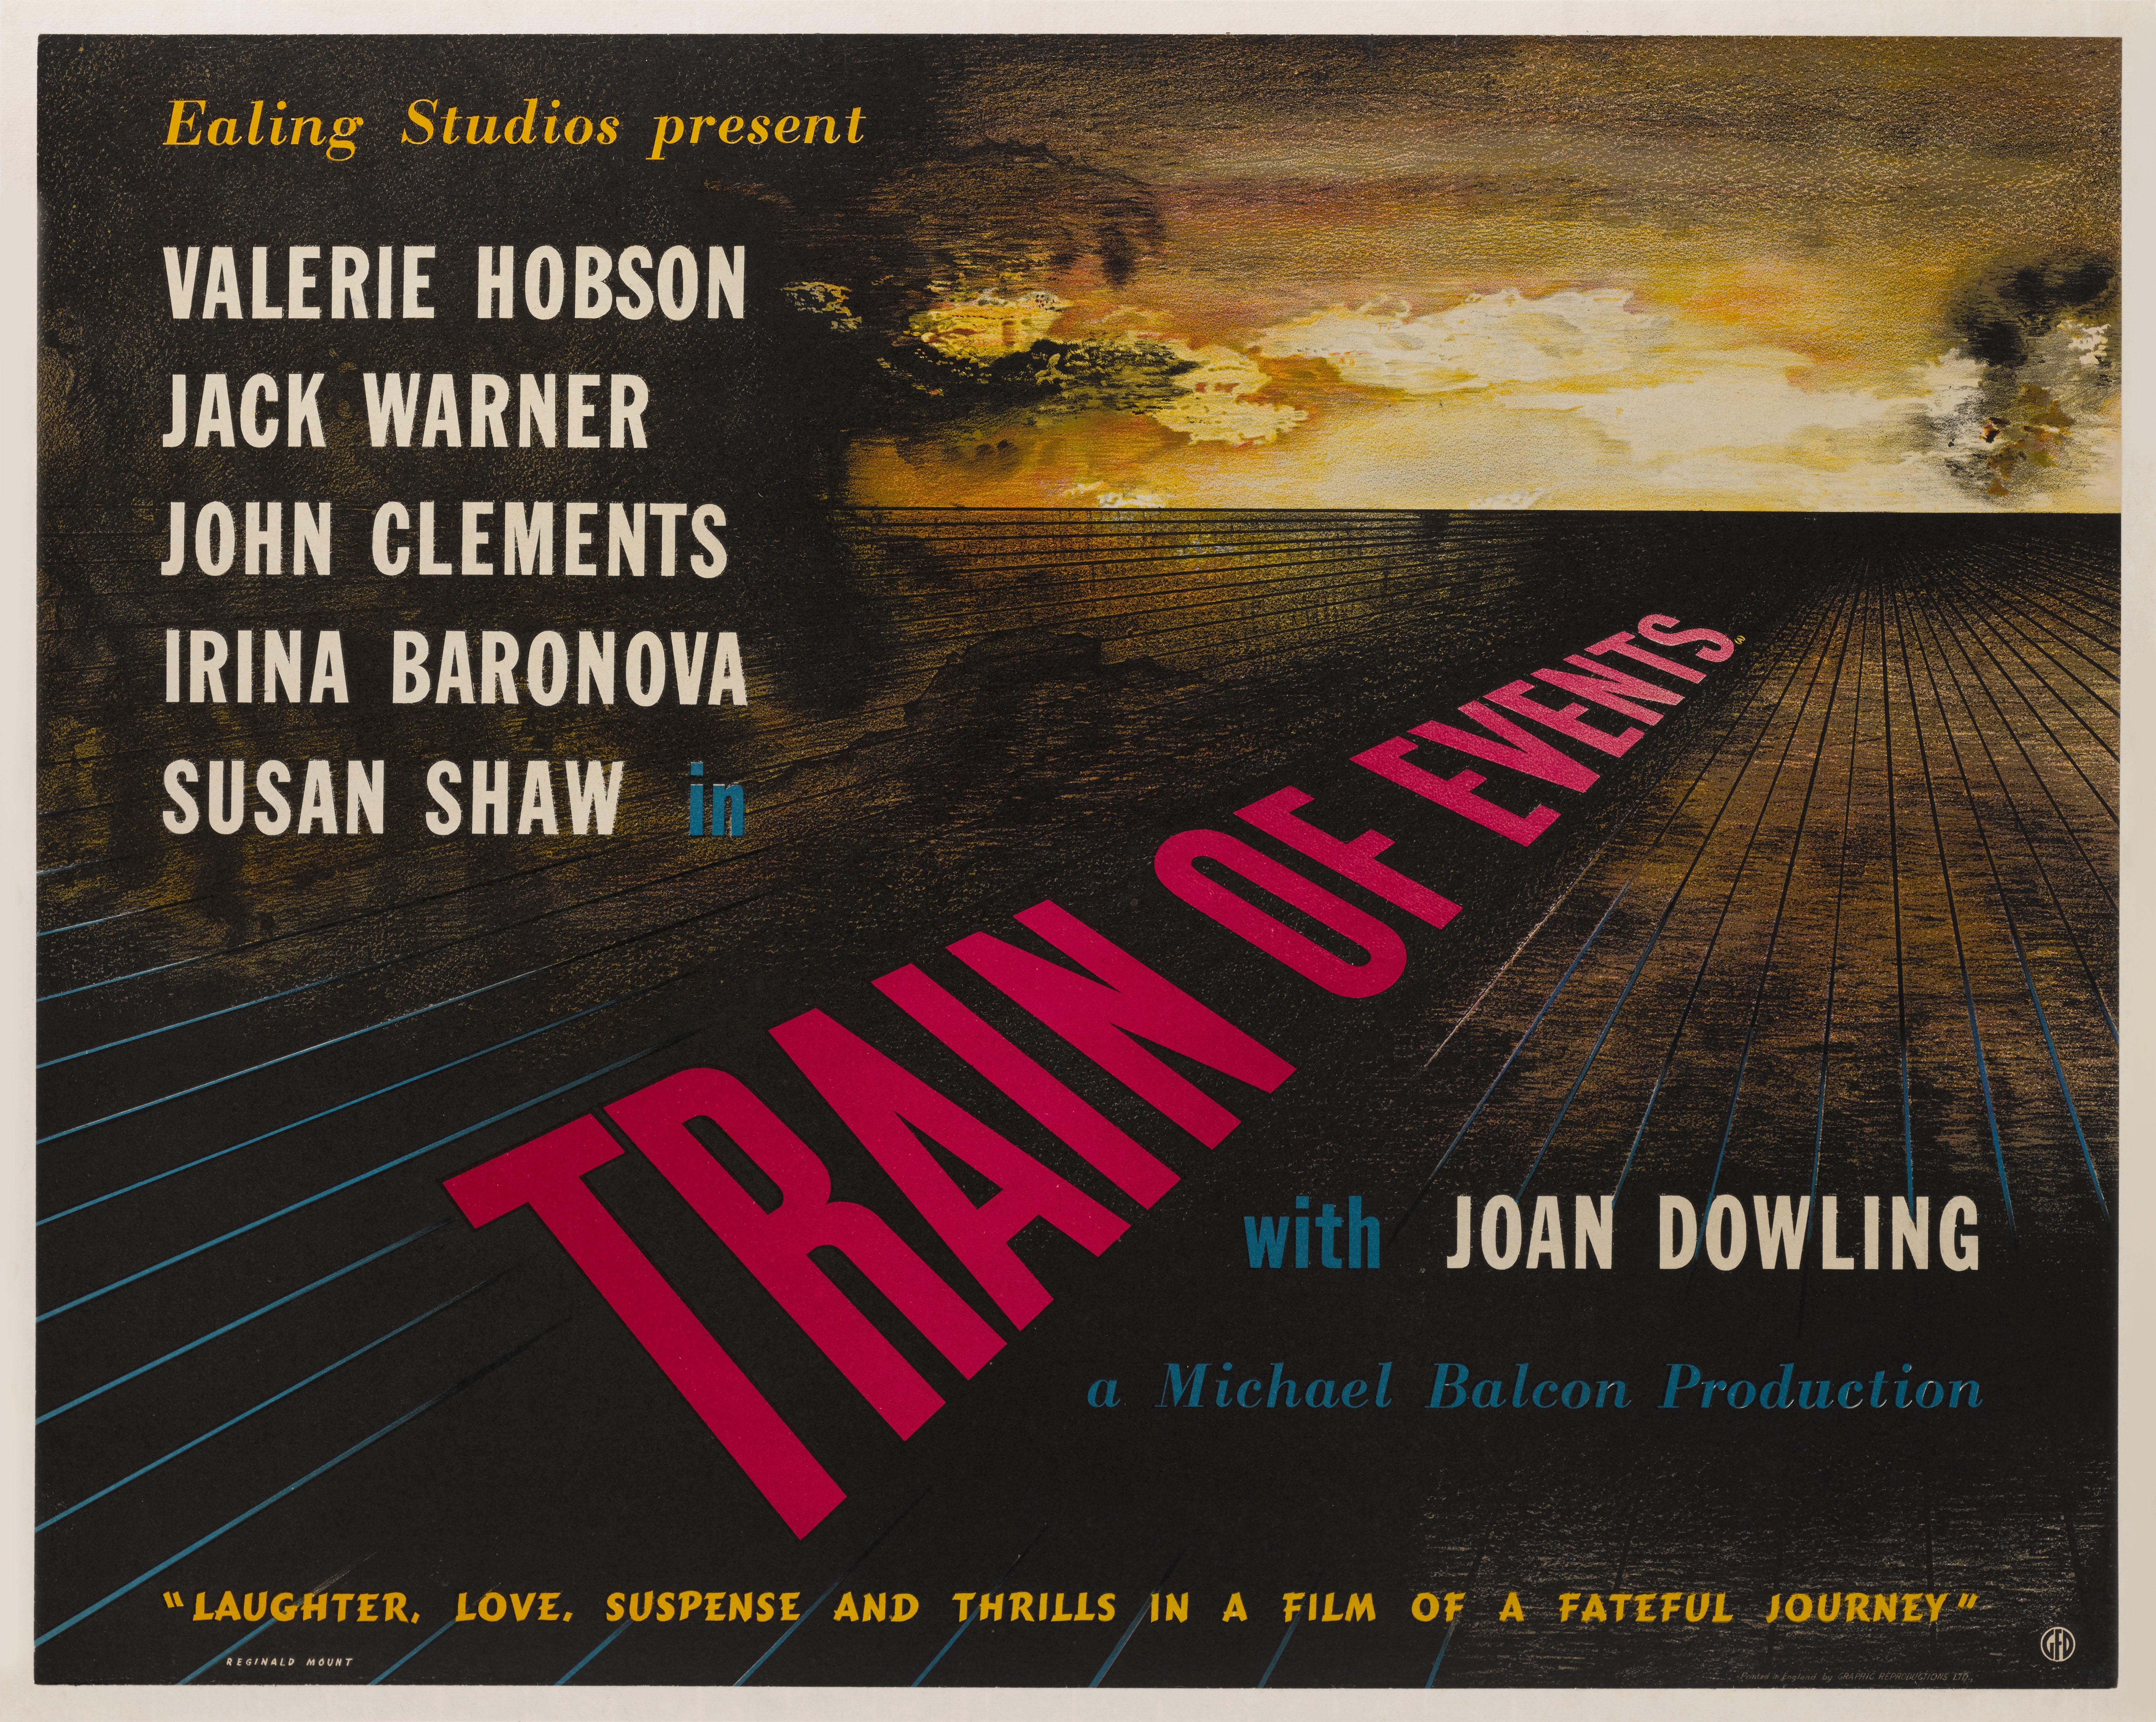 Original British film poster for the 1949 Ealing Studios drama starring Valerie Hobson, Jack Warner, Gladys Henson. The film was directed by Sidney Cole, Charles Crichton and Basil Dearden. The artwork is by the British artist Reginald Mount